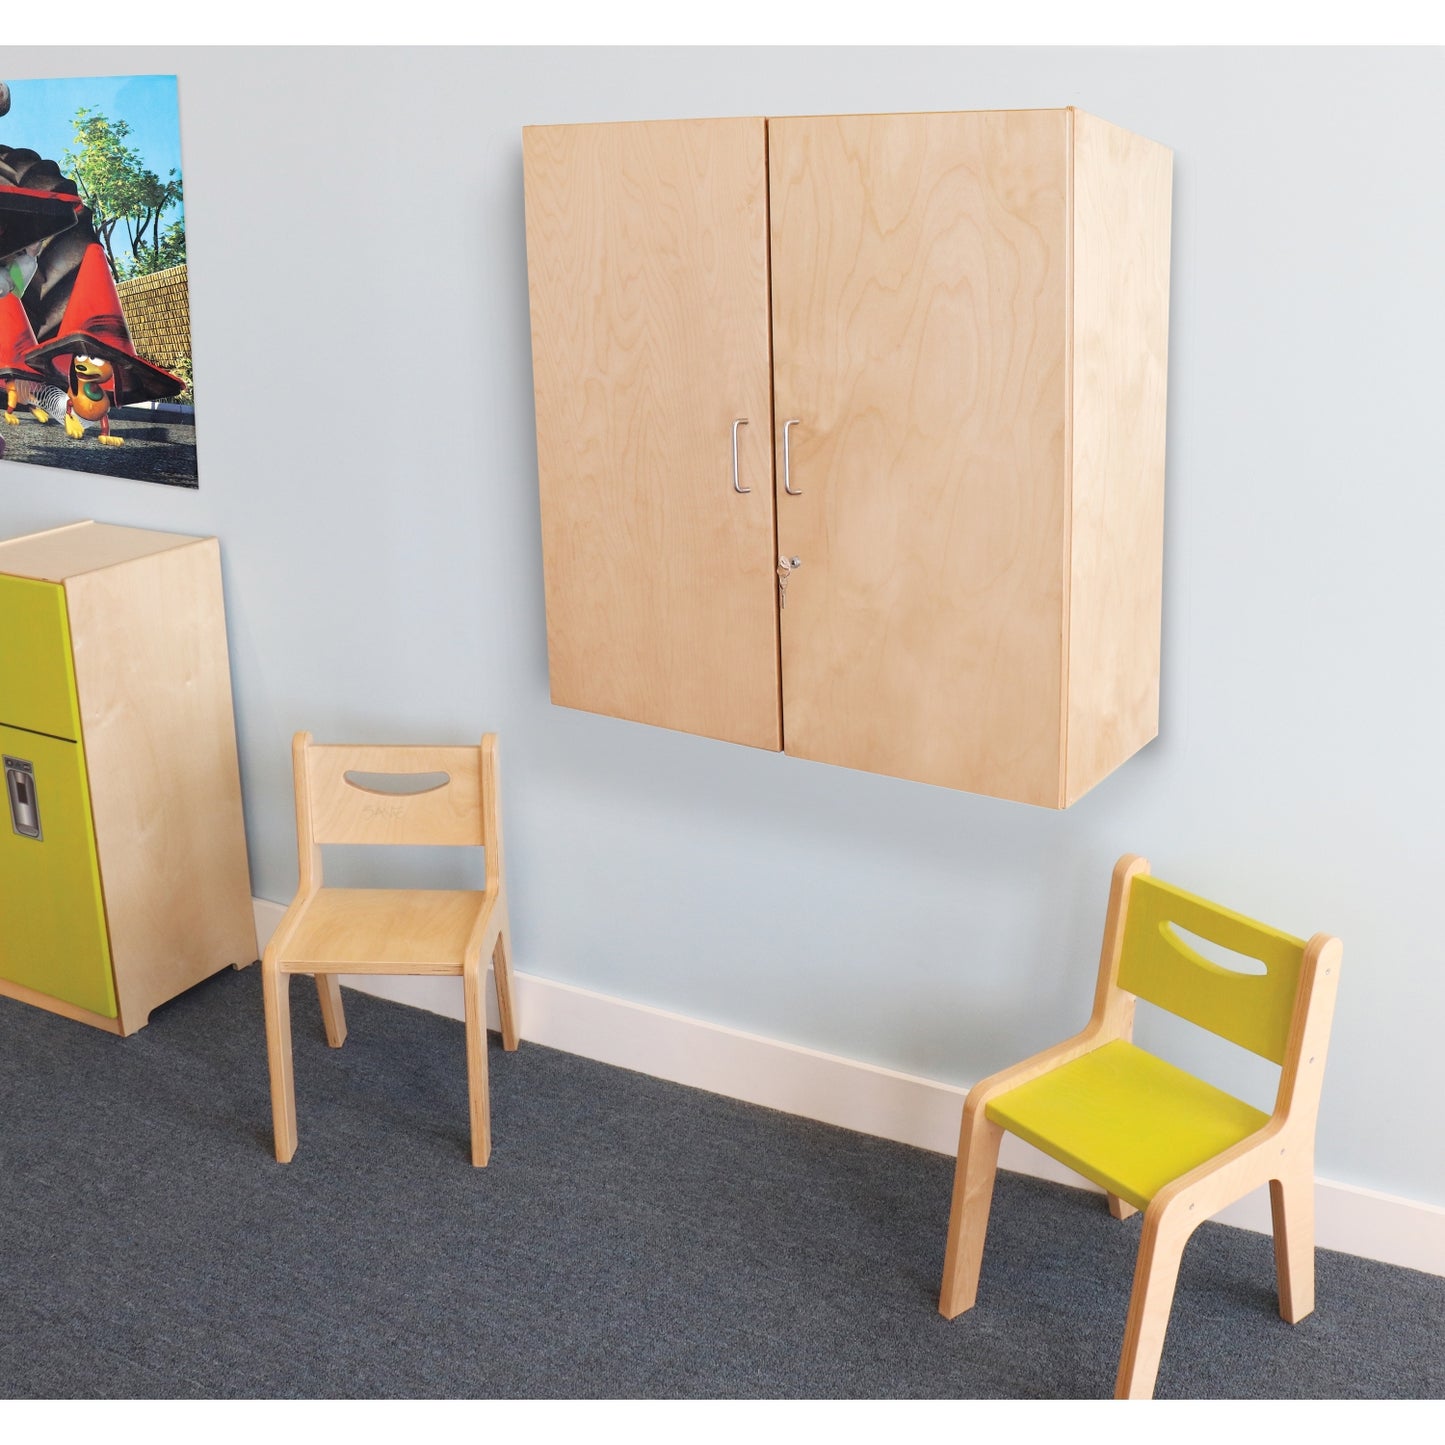 Lockable Wall Mounted Cabinet